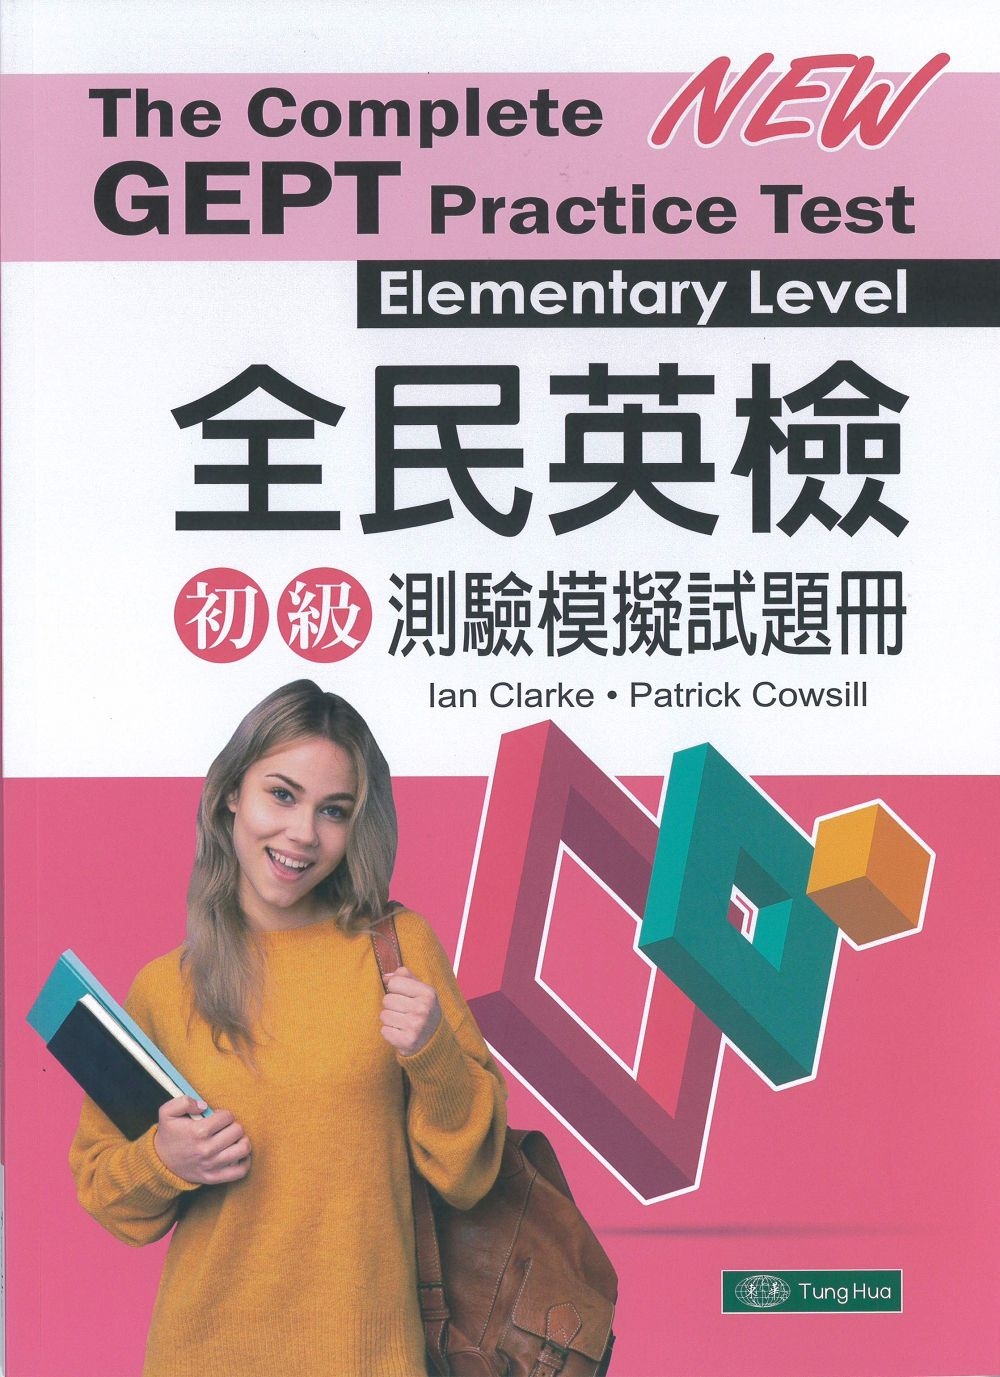 The Complete GEPT Practice Test: Elementary Level 全民英檢初級測驗模擬試題冊